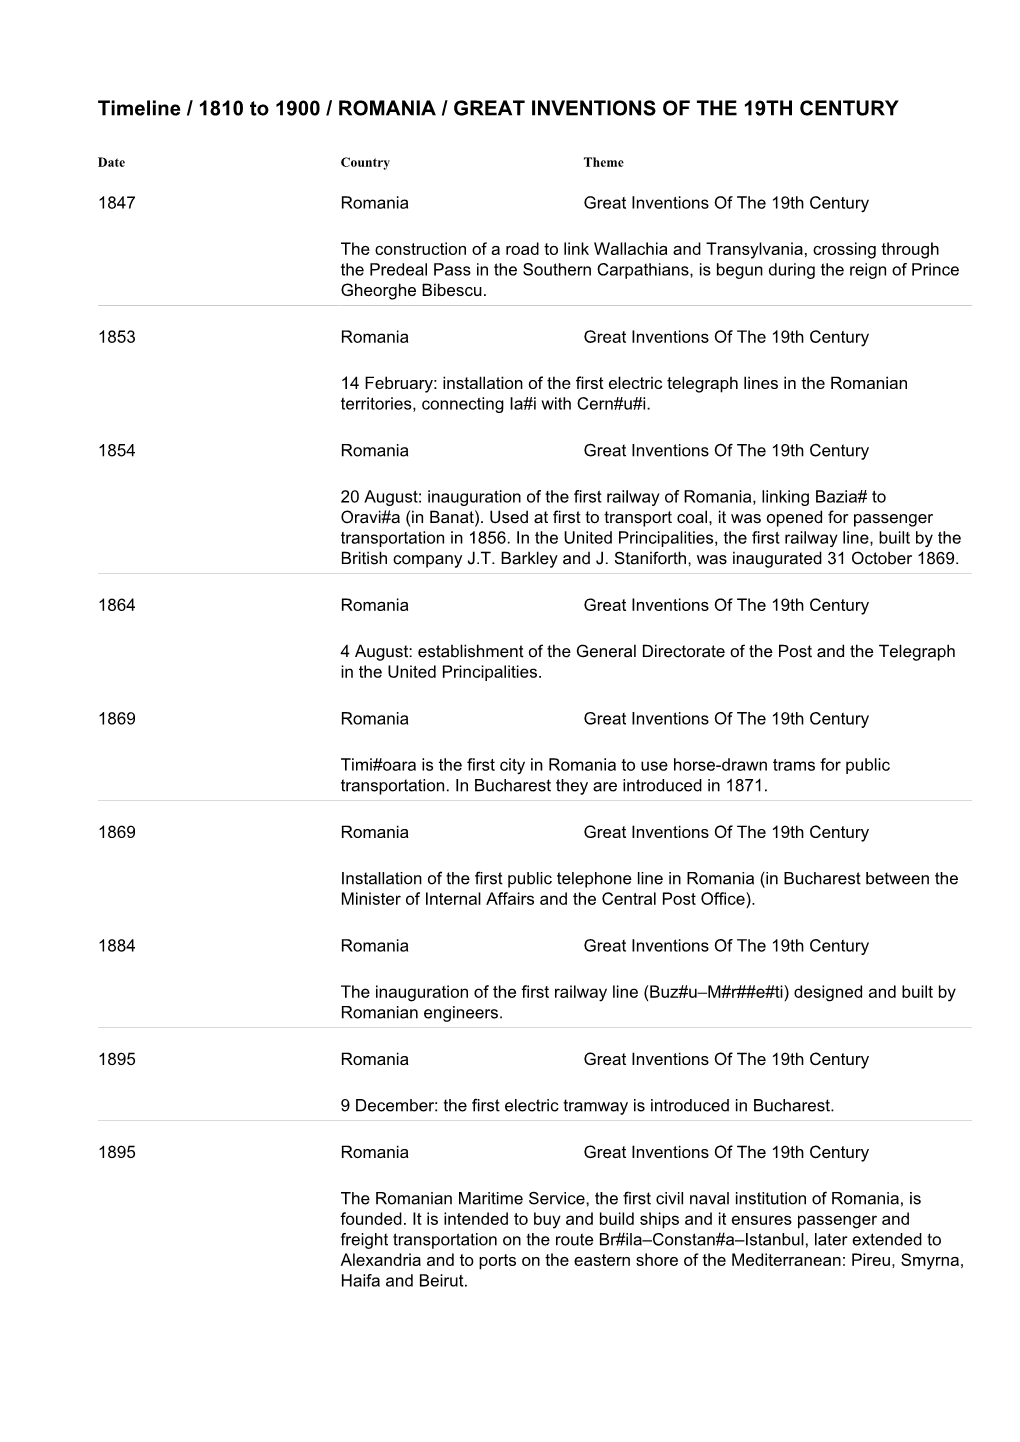 Timeline / 1810 to 1900 / ROMANIA / GREAT INVENTIONS of the 19TH CENTURY